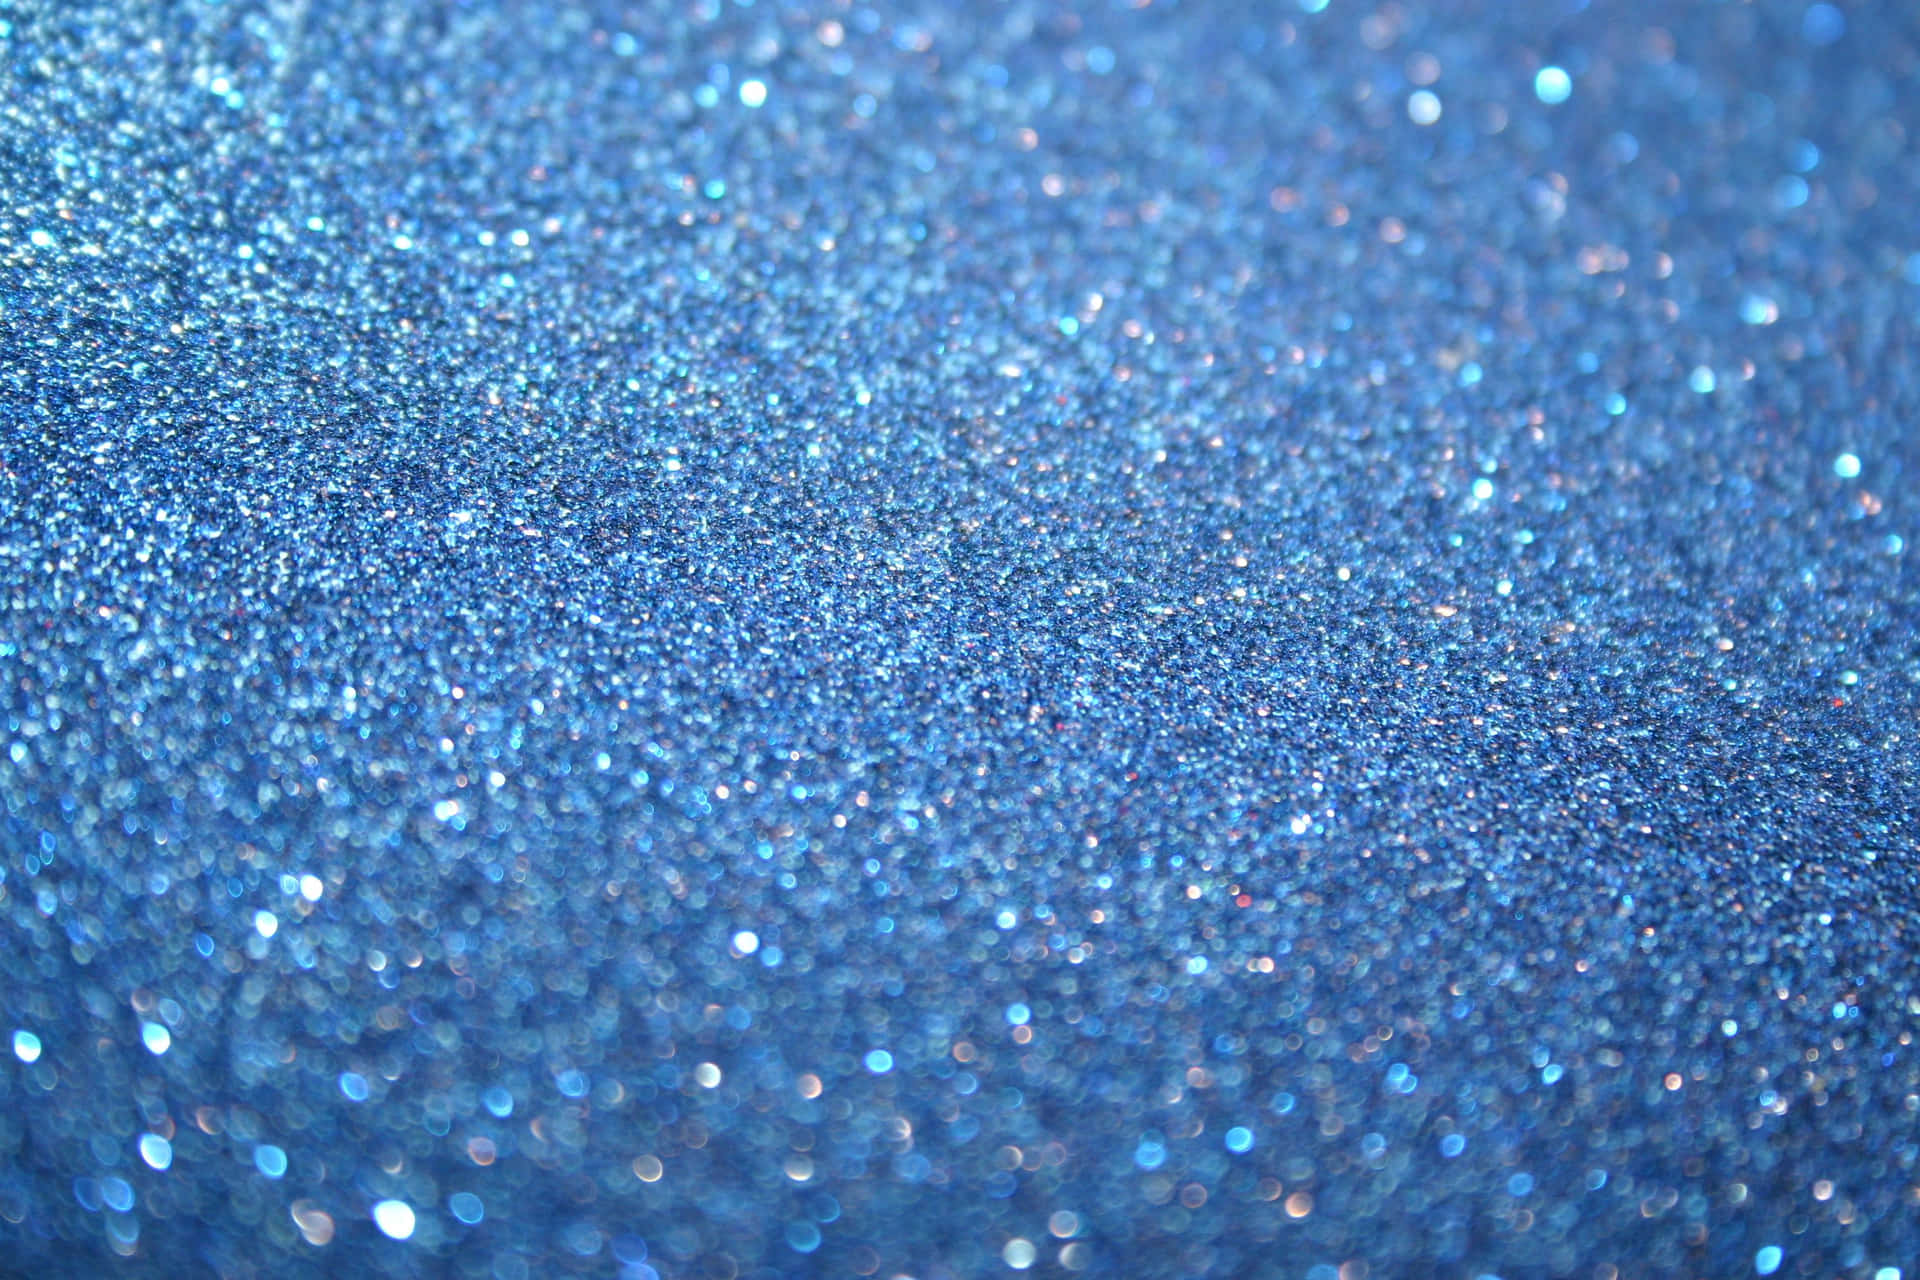 Add a touch of sparkle to your day with this vibrant background!